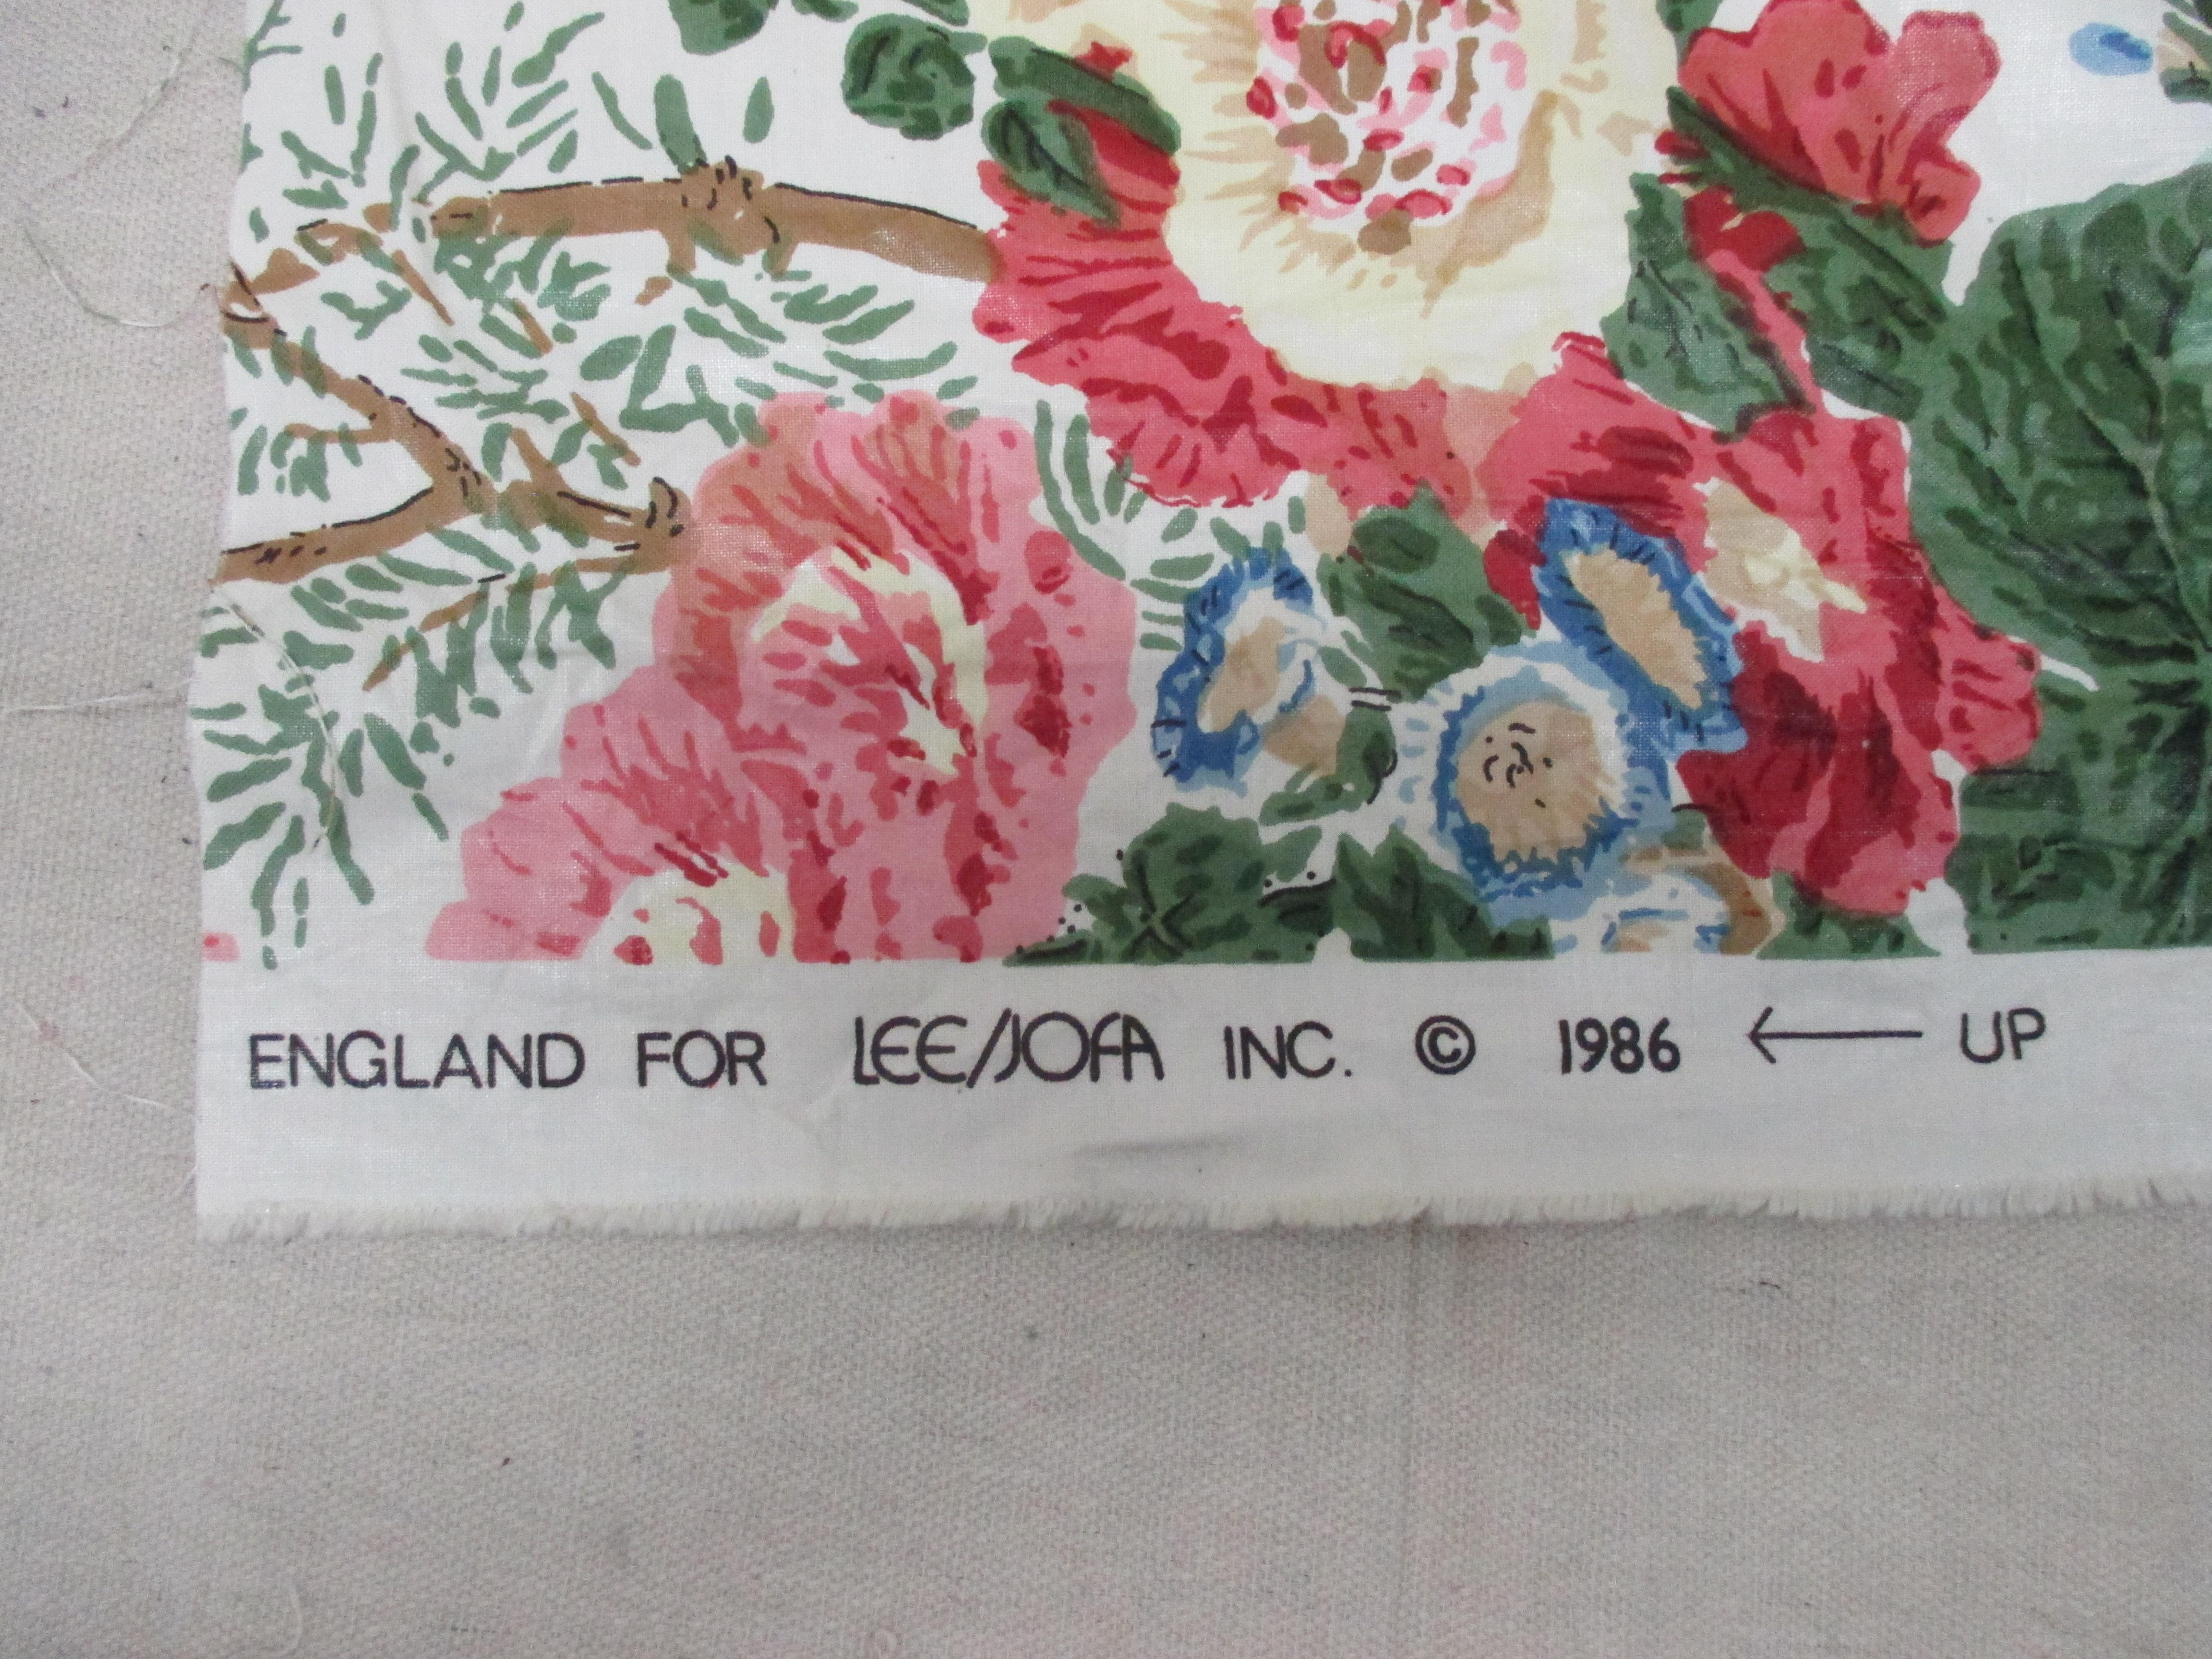 Yardage Lee Jofa Althea Cotton Chintz
5.75 yards selling the entire lot.
Measure: 56